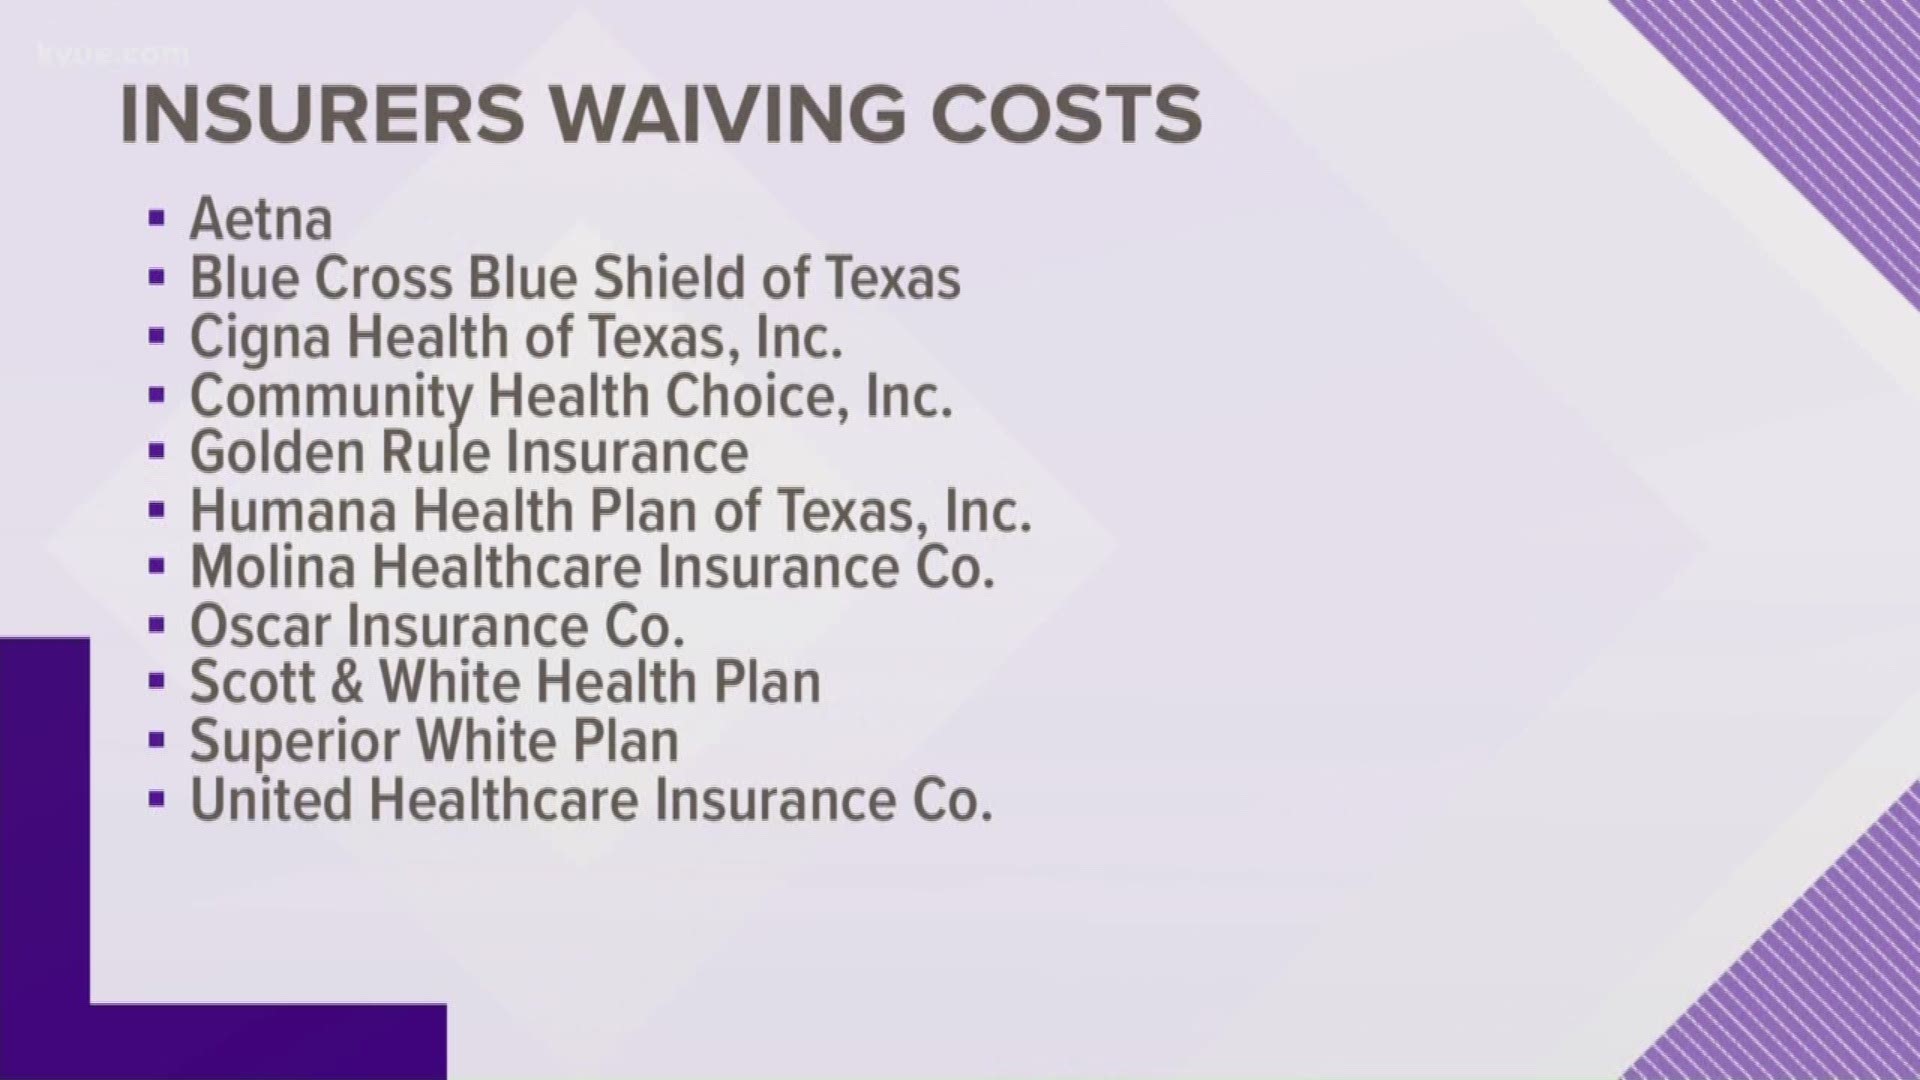 Gov. Greg Abbott is asking health insurance providers to waive the costs associated with the coronavirus.